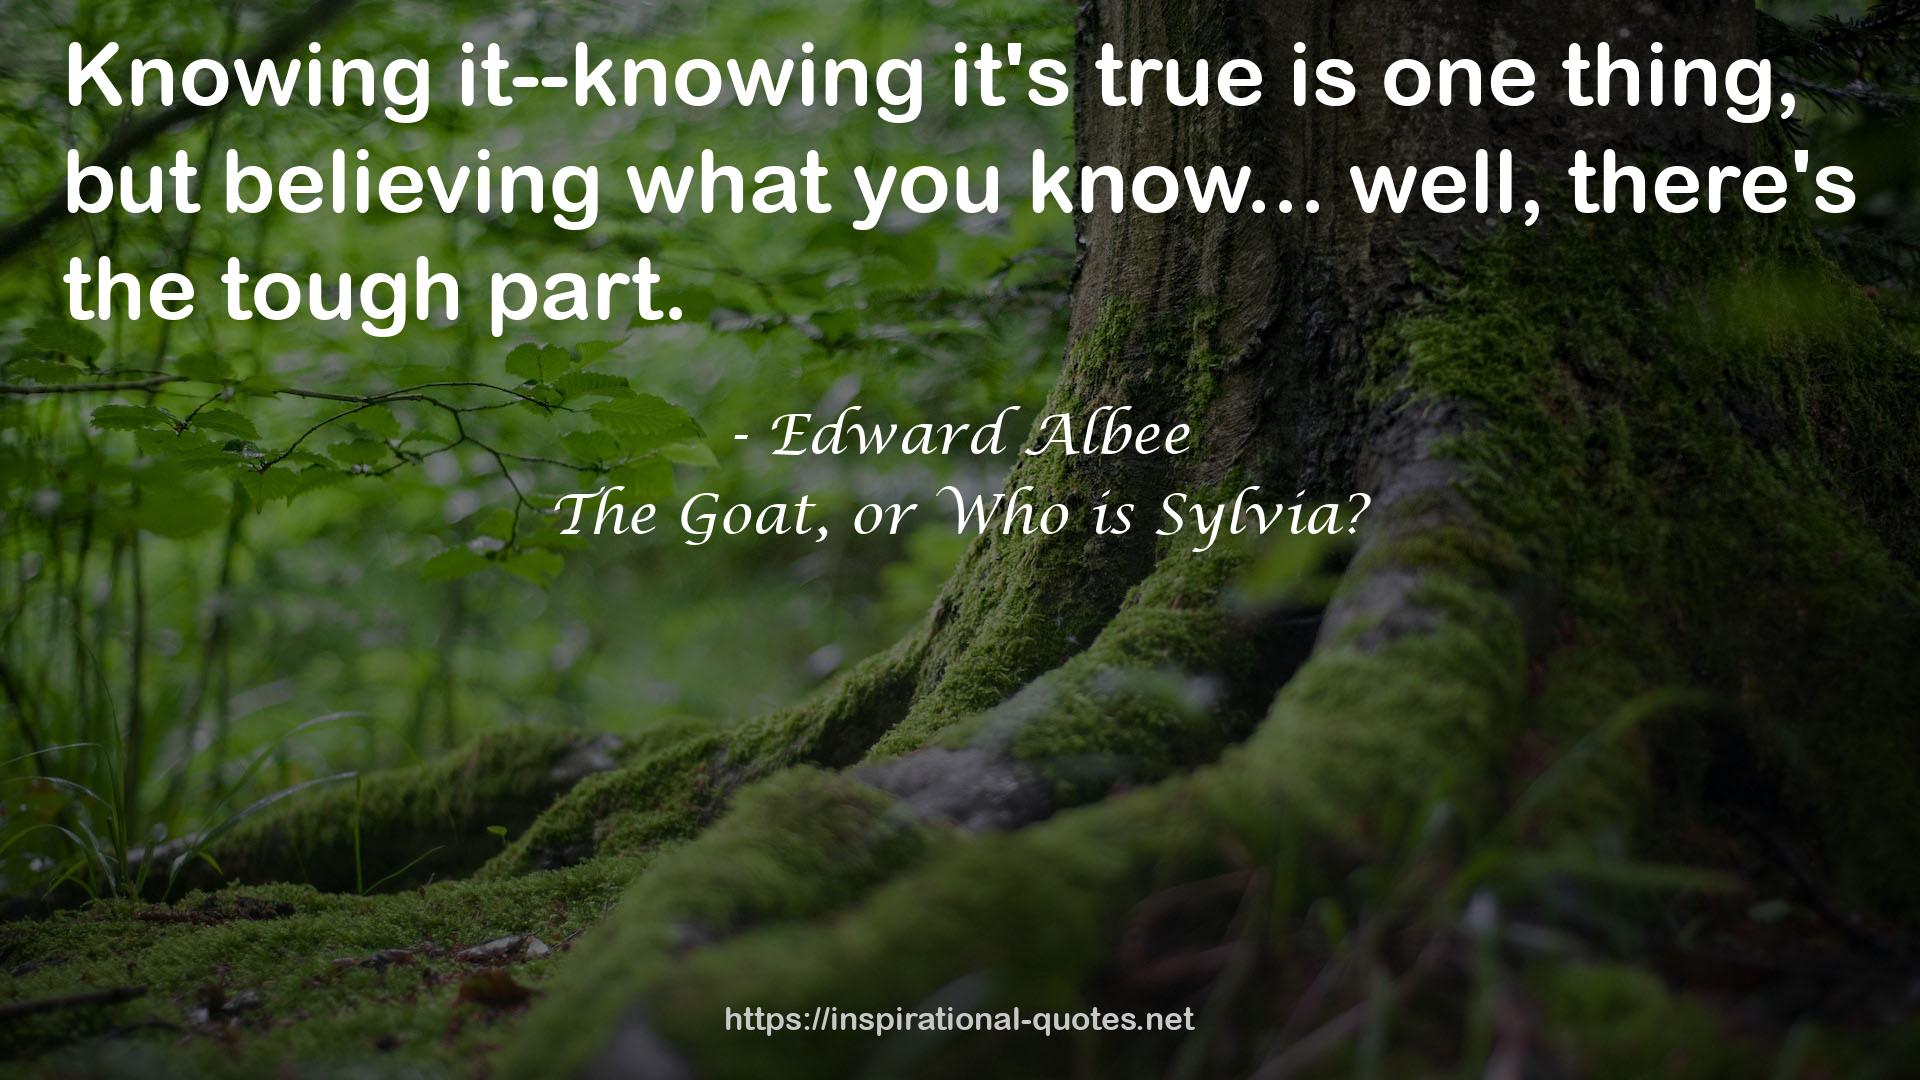 The Goat, or Who is Sylvia? QUOTES